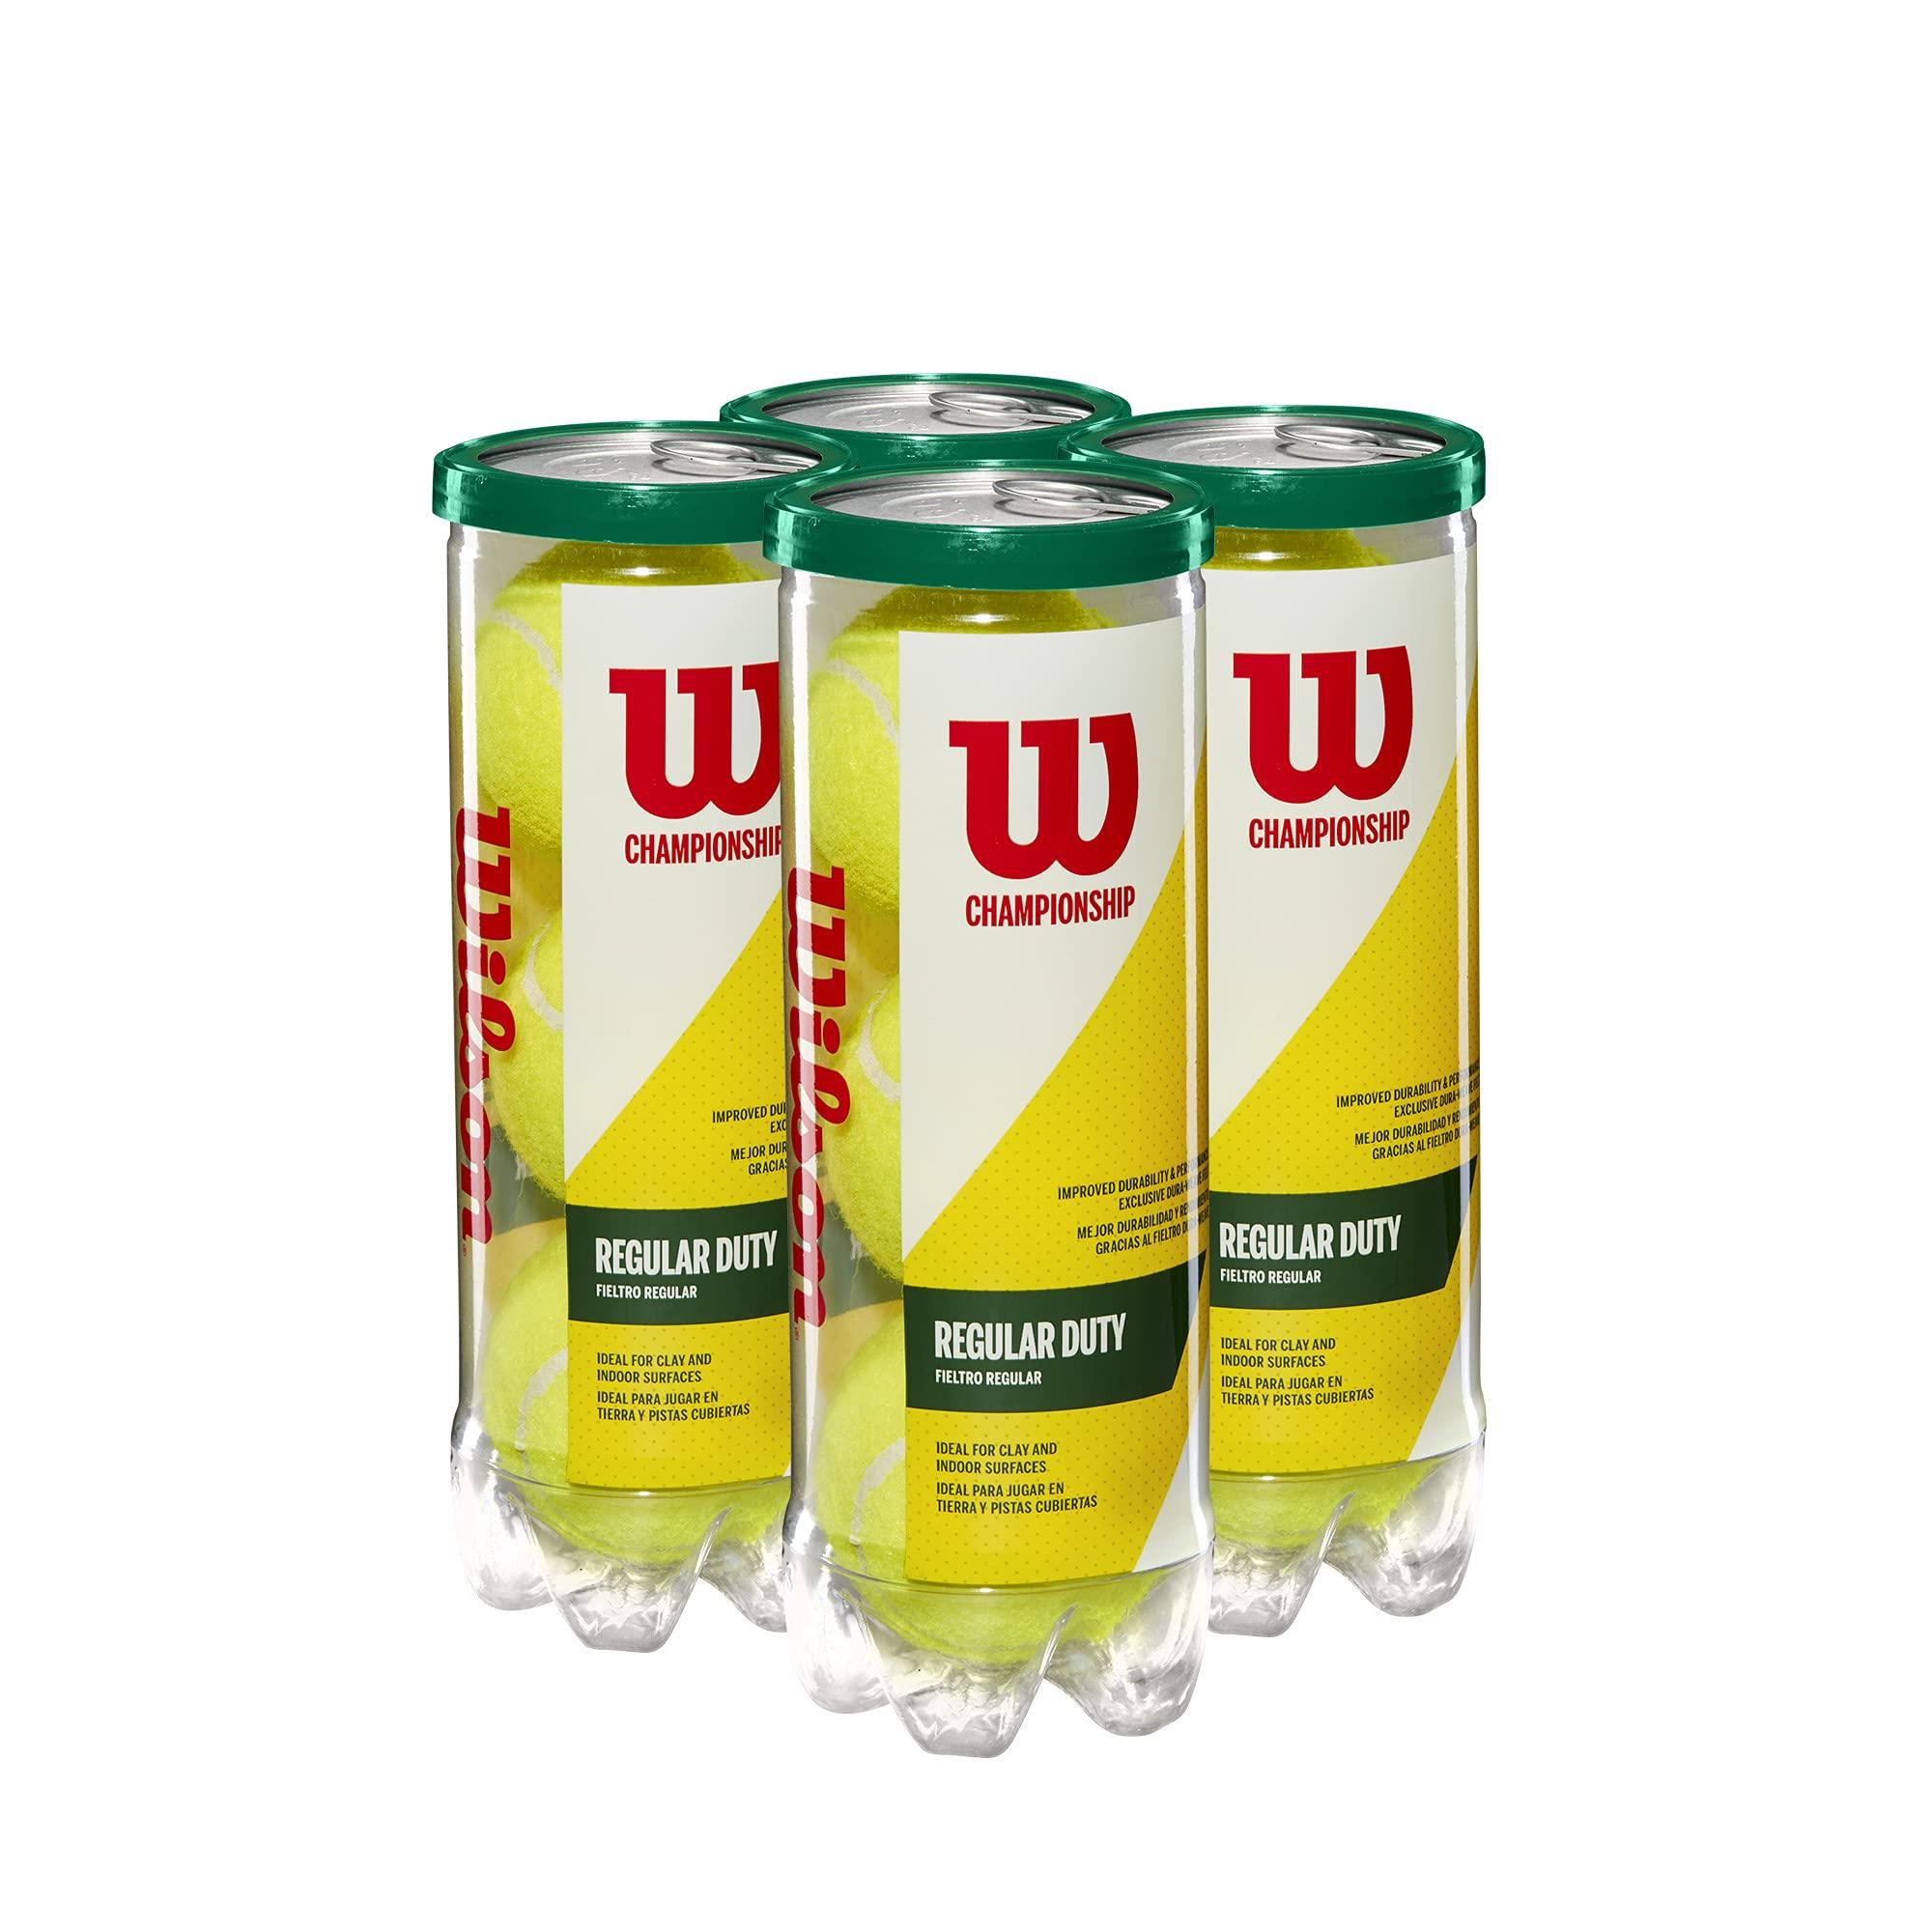 Shop WILSON Championship Tennis Balls - Regular Duty, Single Can (3 Balls) Online at Low Prices in USA